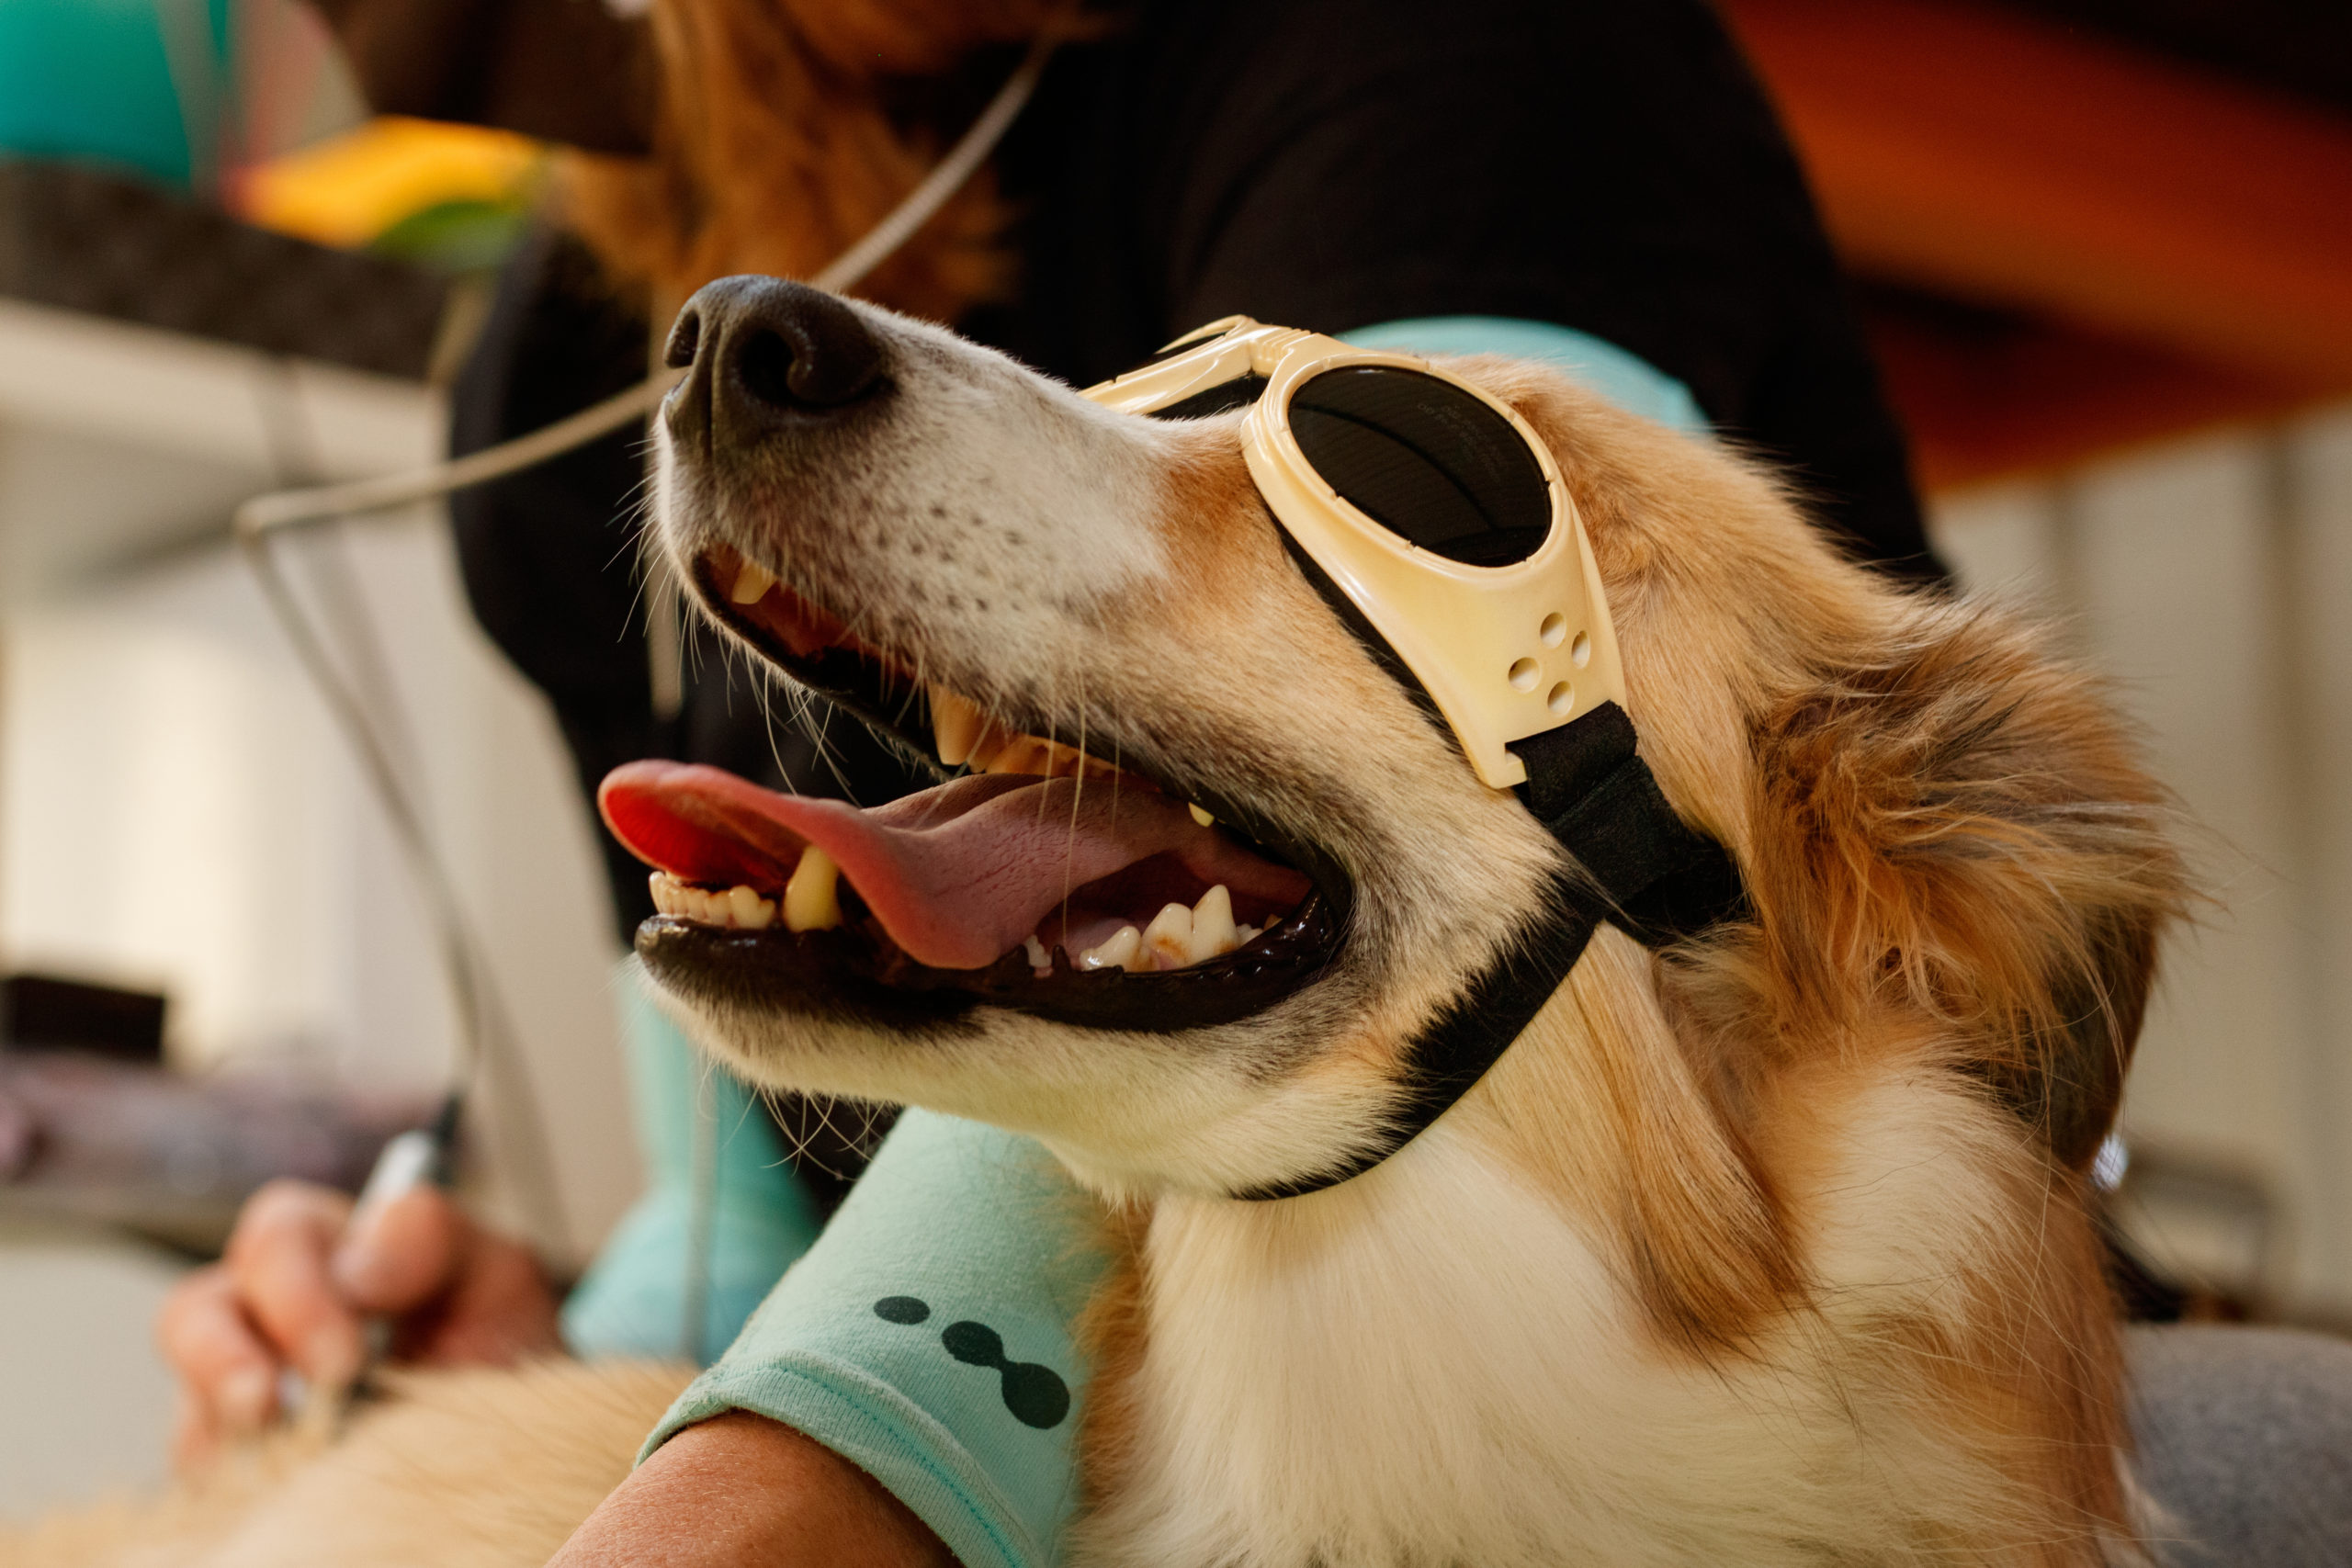 laser therapy treatment performed on dog